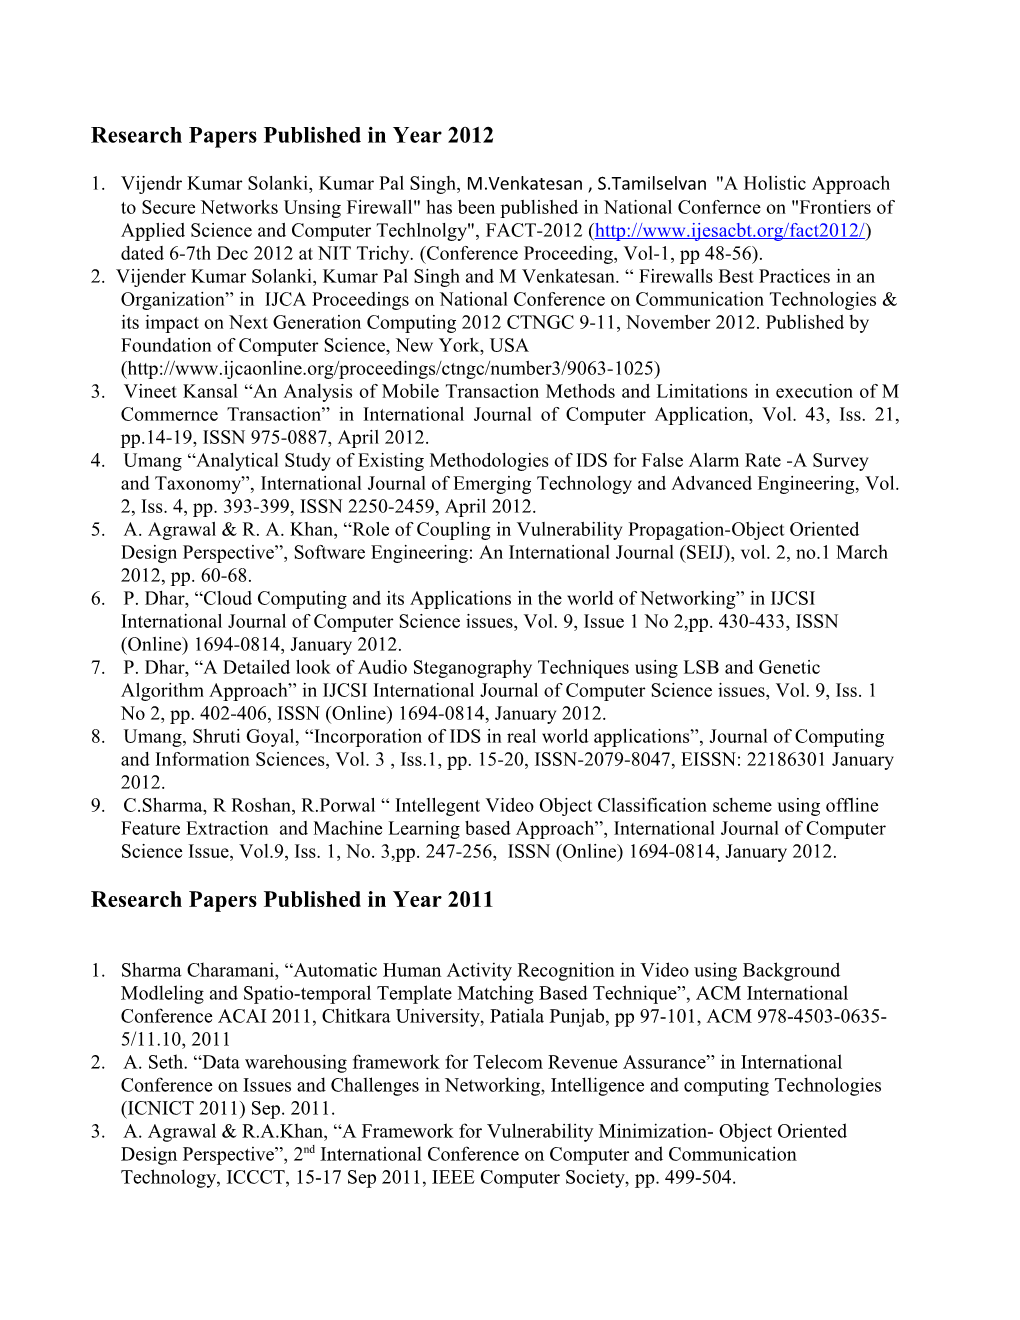 Research Papers Published in Year 2012